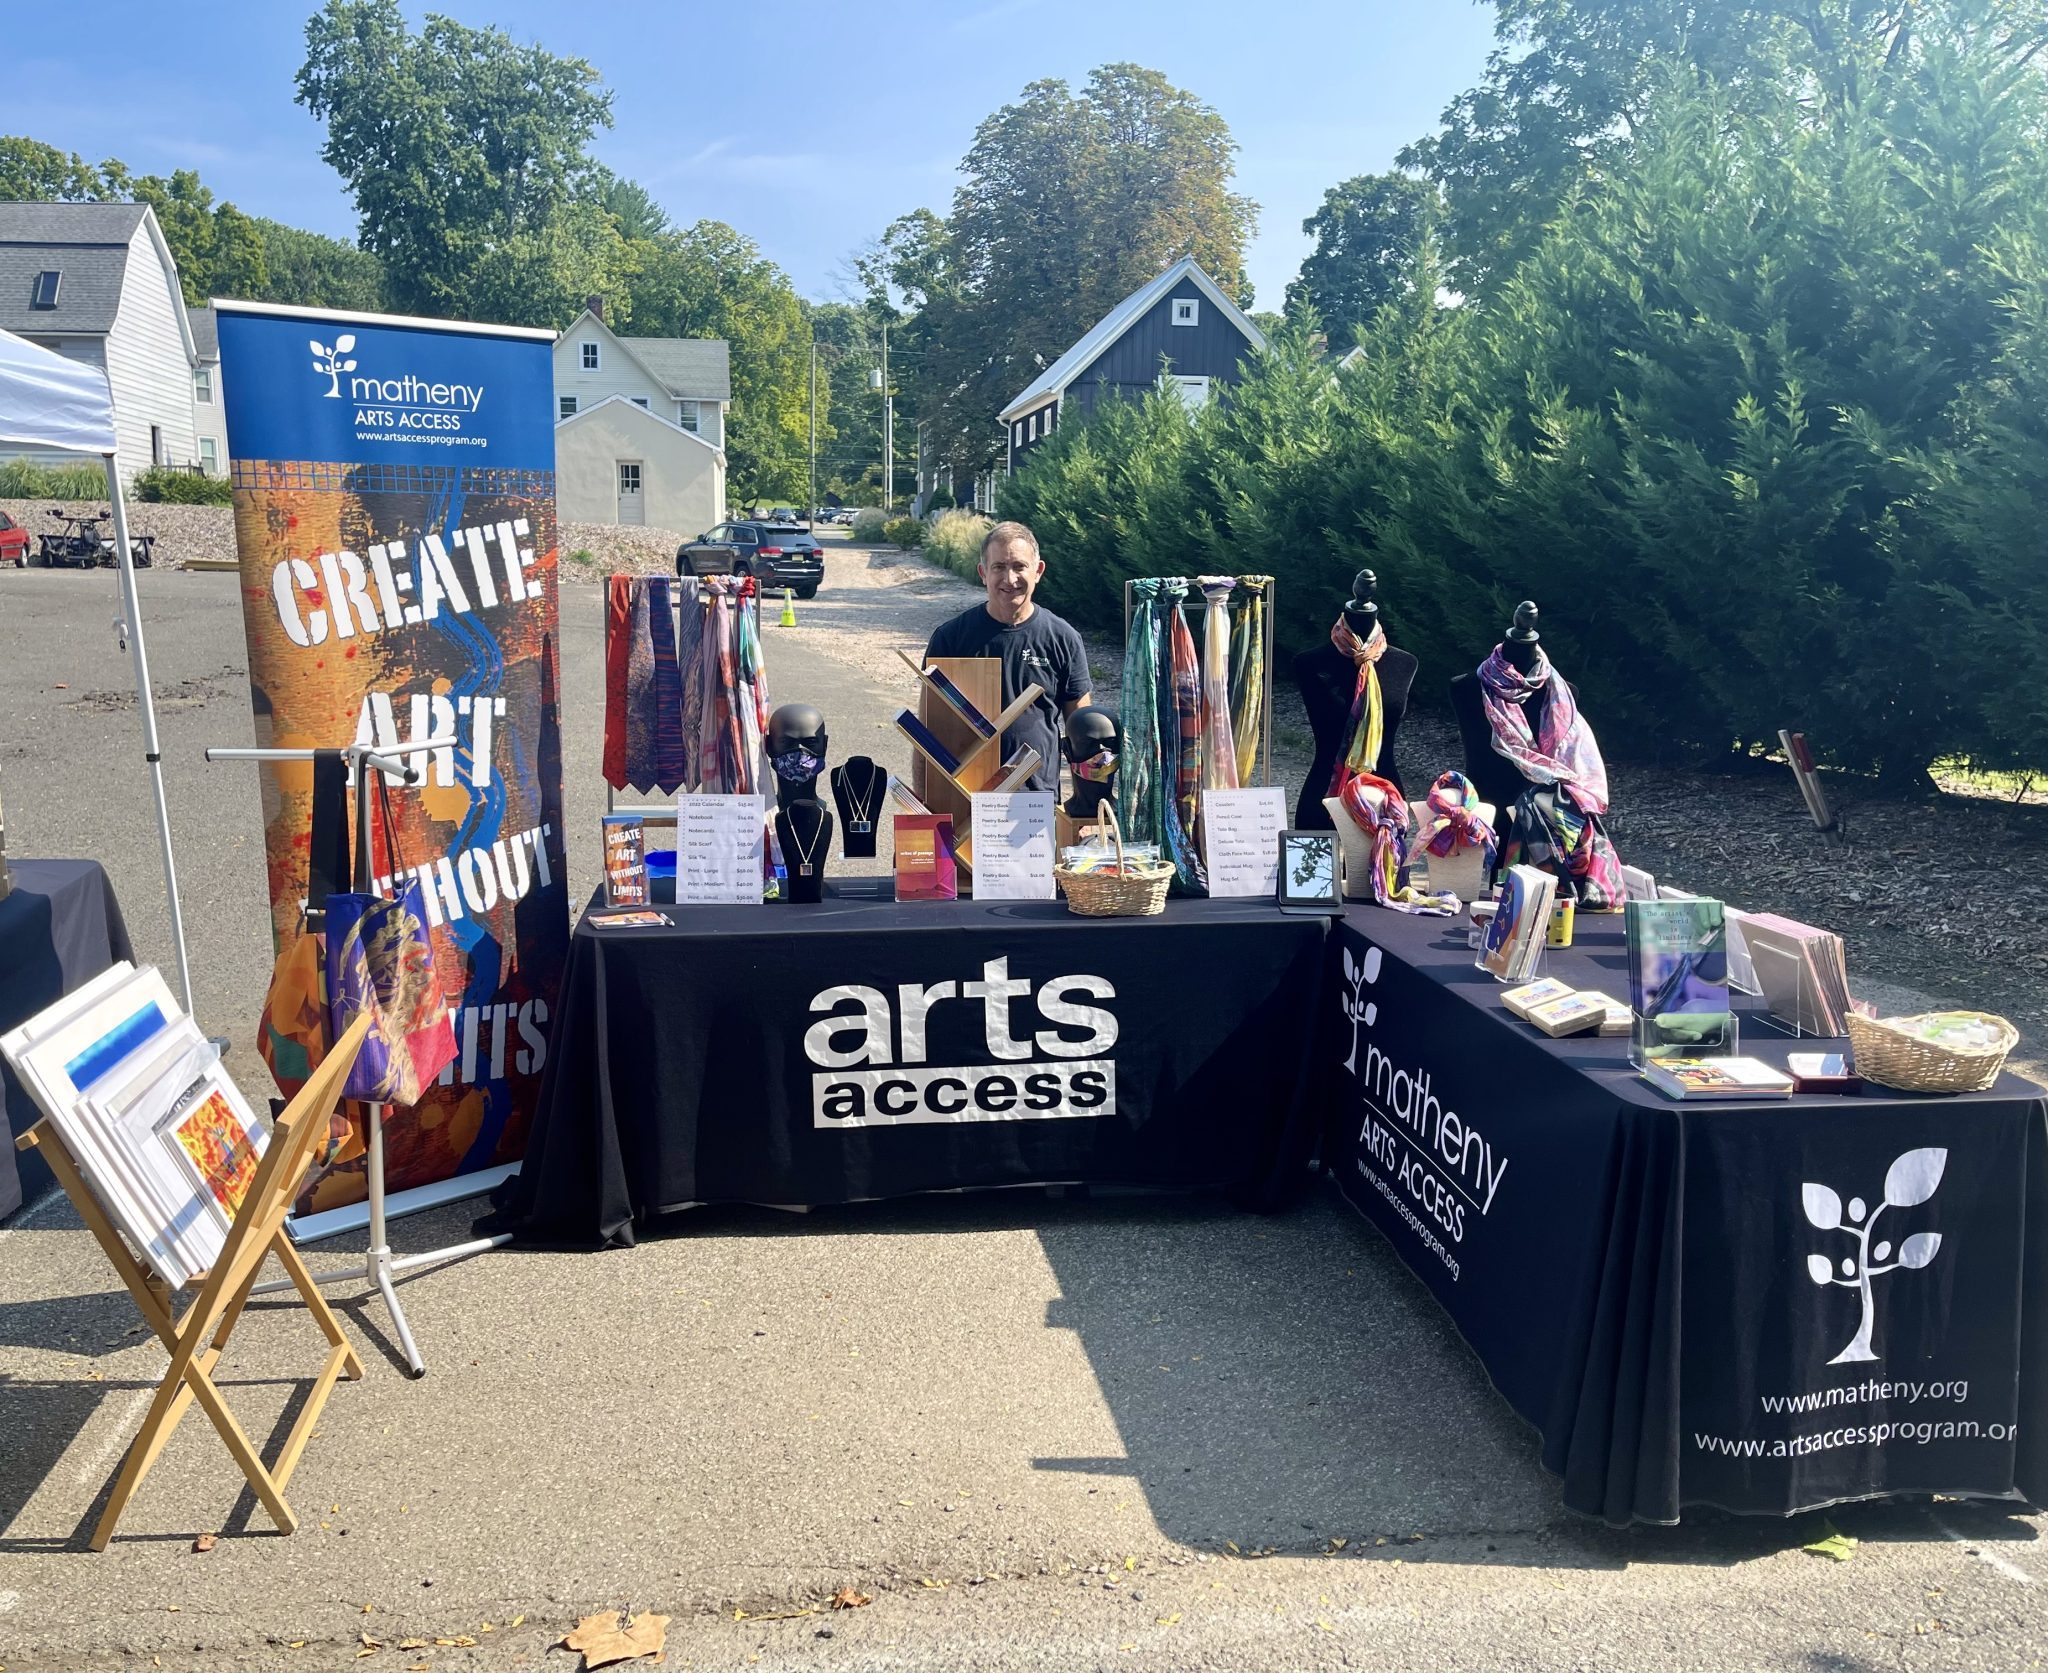 Arts Access merchandise display at Art in the Park in Peapack New Jersey.